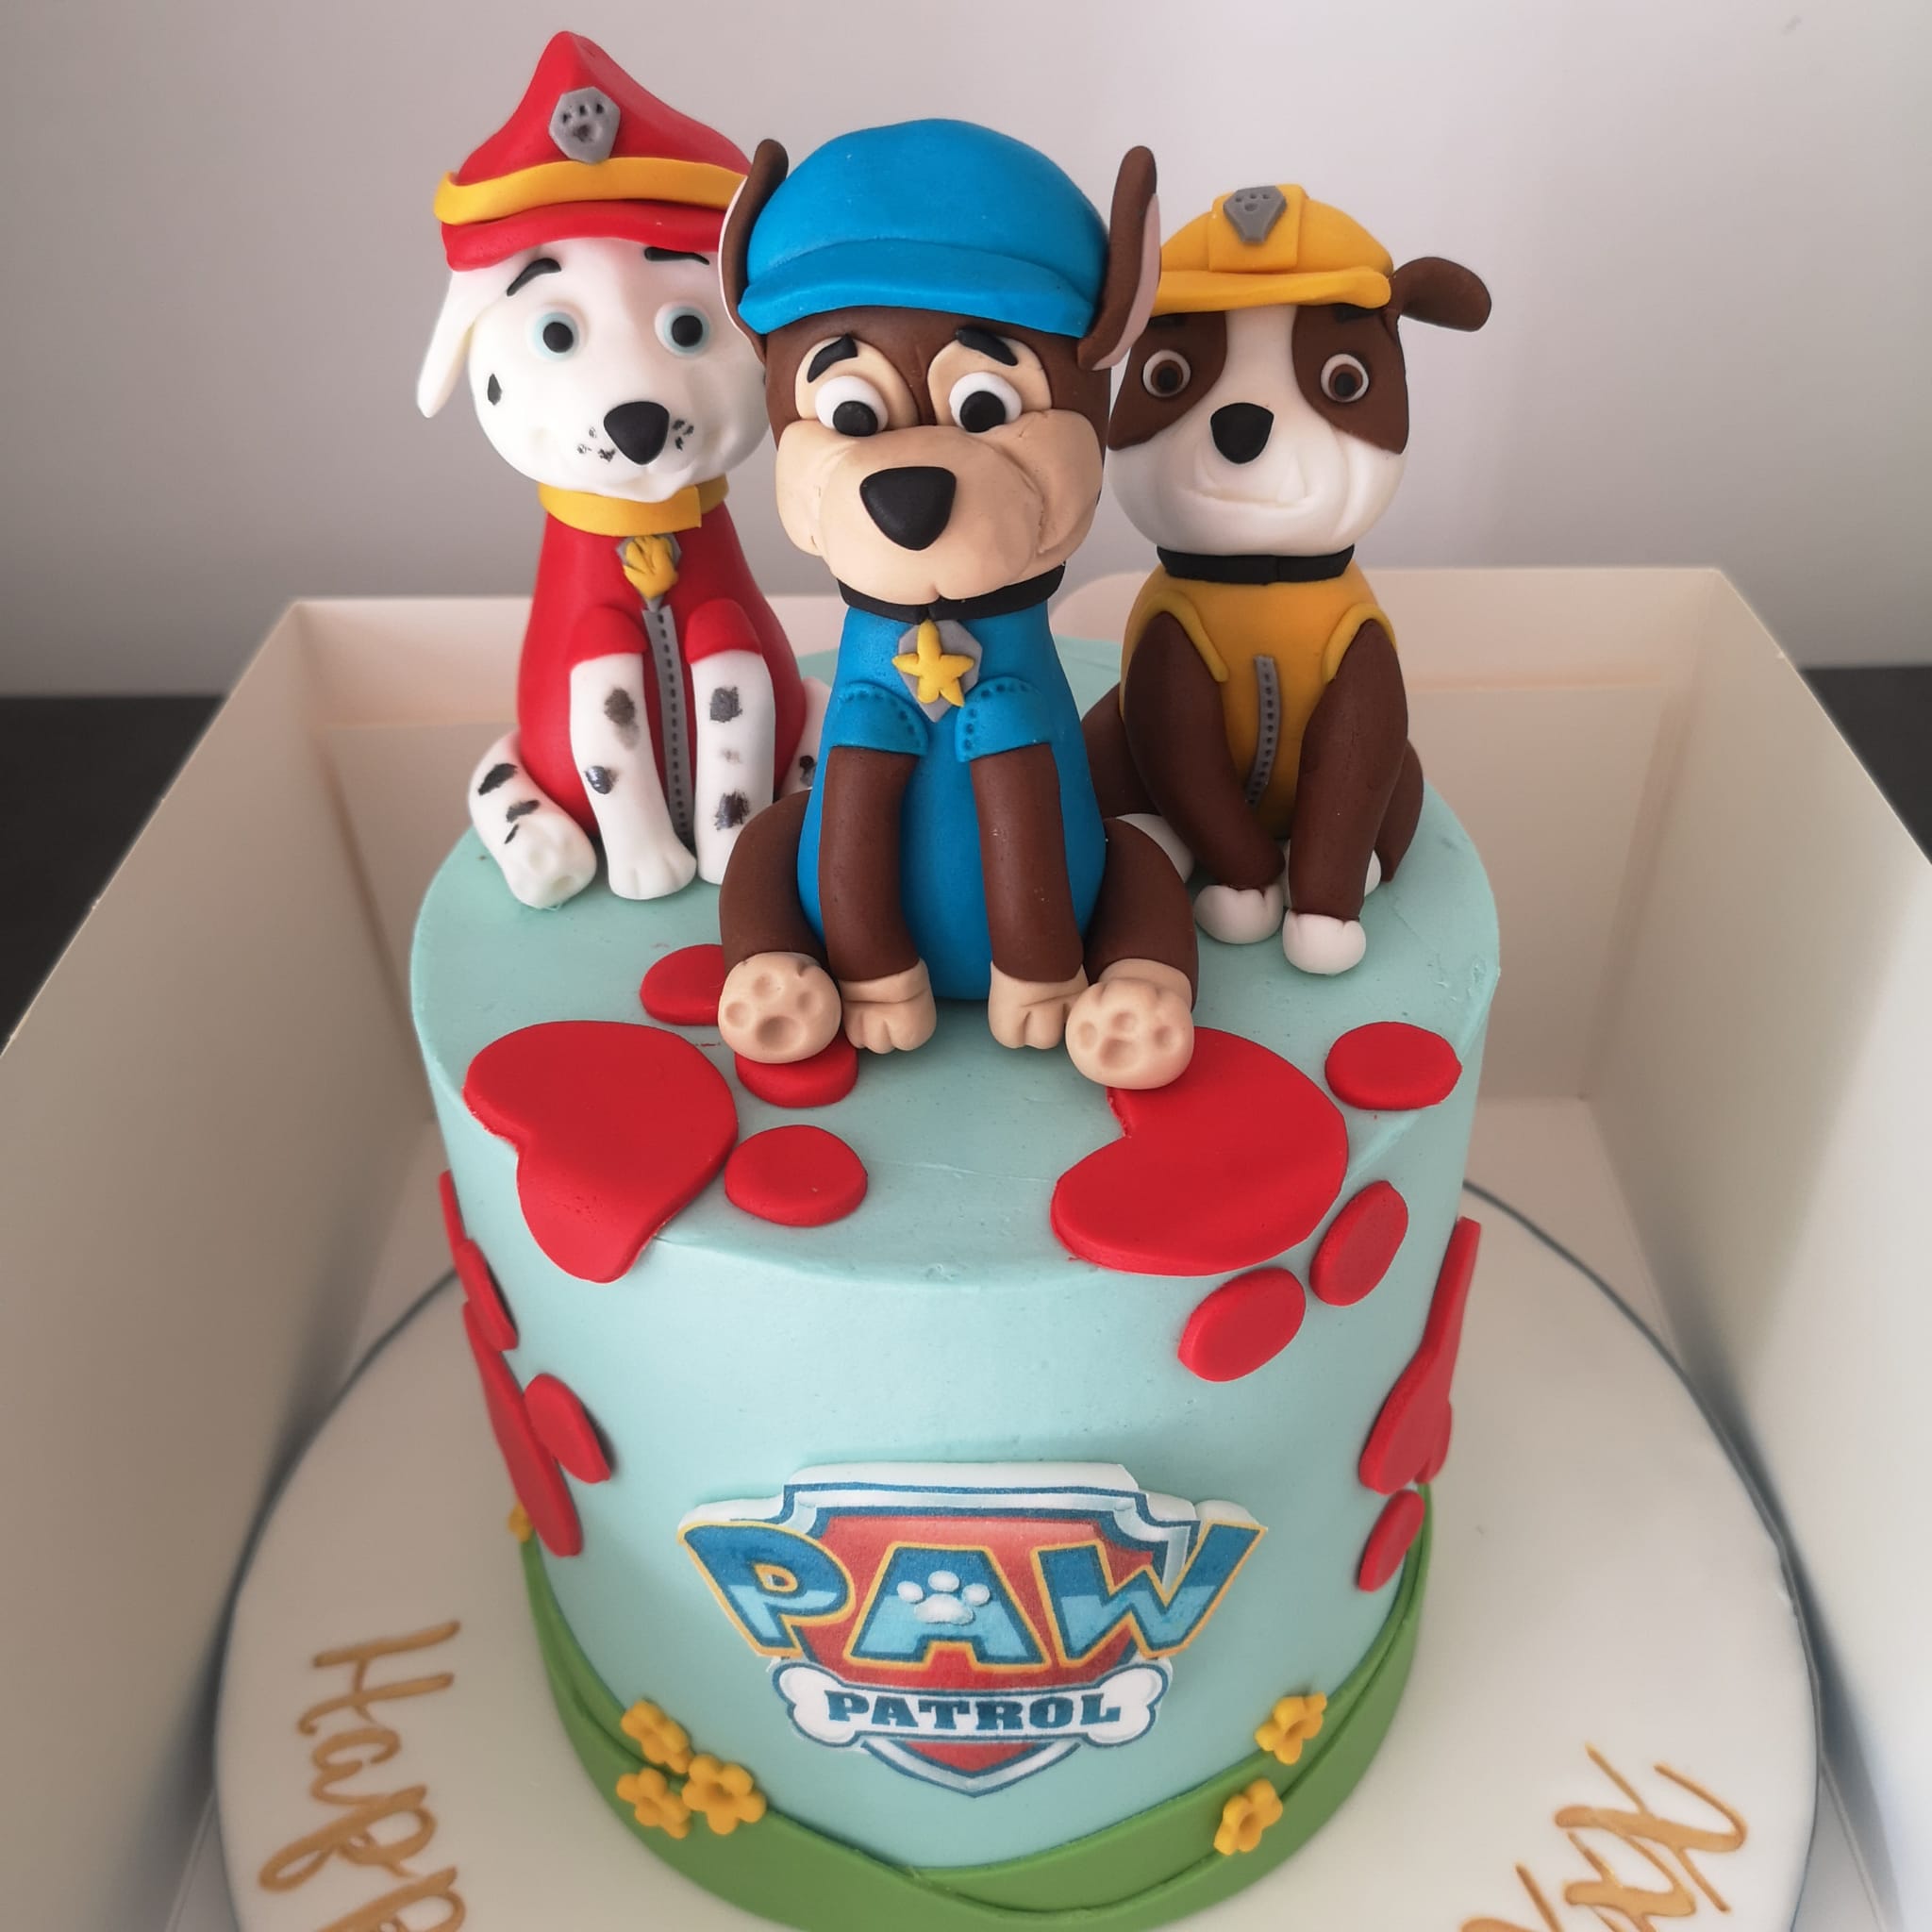 Paw Patrol Cake with Chase and Friends - Eve's Cakes